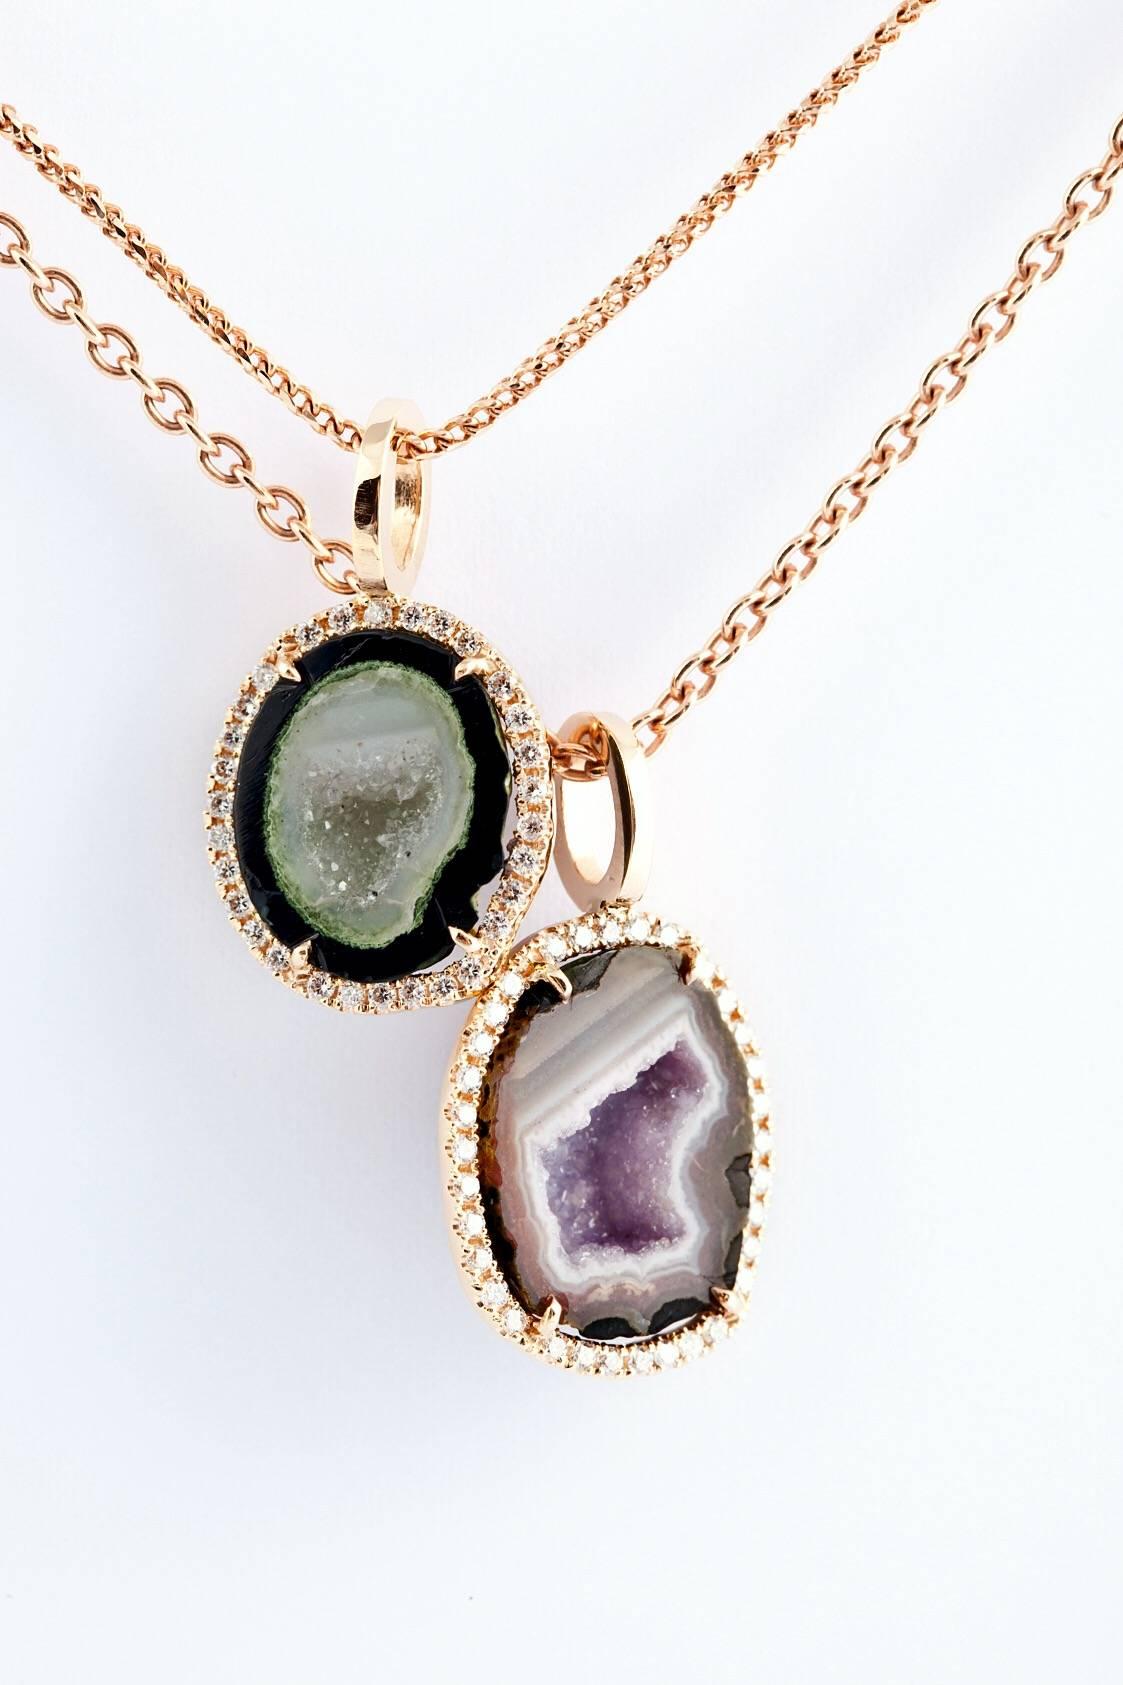 This 18 k rose gold black agate geode pendant has 0.22 ct of dazzling diamonds.
This is the perfect gift for yourself or a special person.
The chain is included and is 45 cm and adjustable with a sliding ball system.